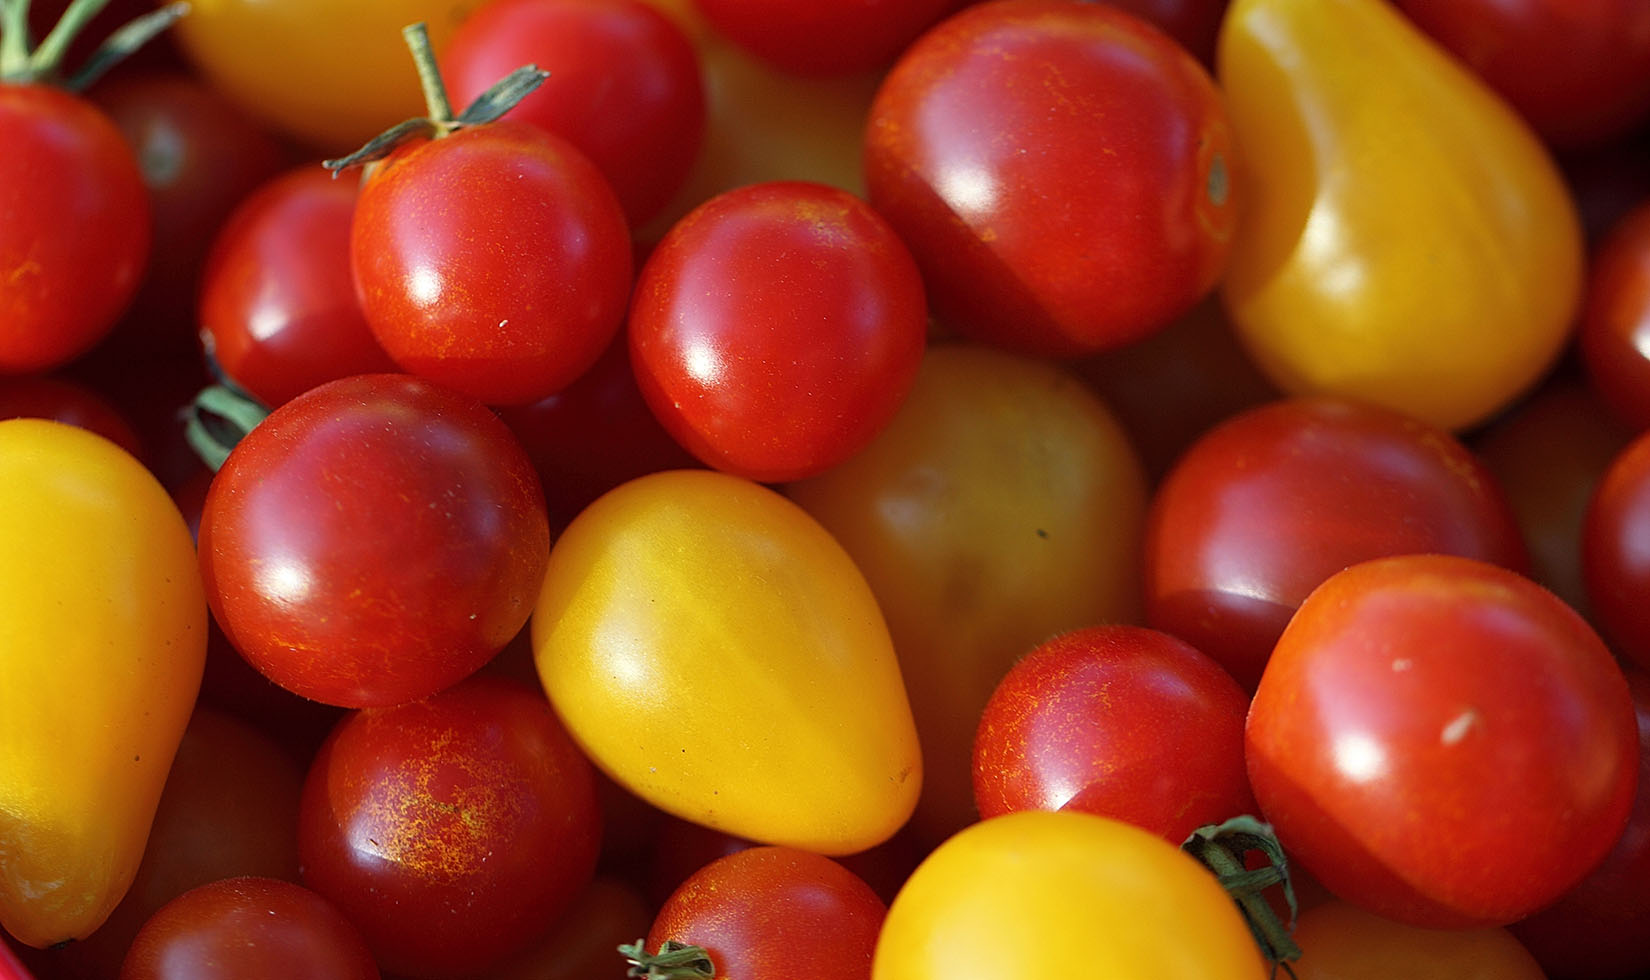 Basket of yellow and red cherry tomatoes